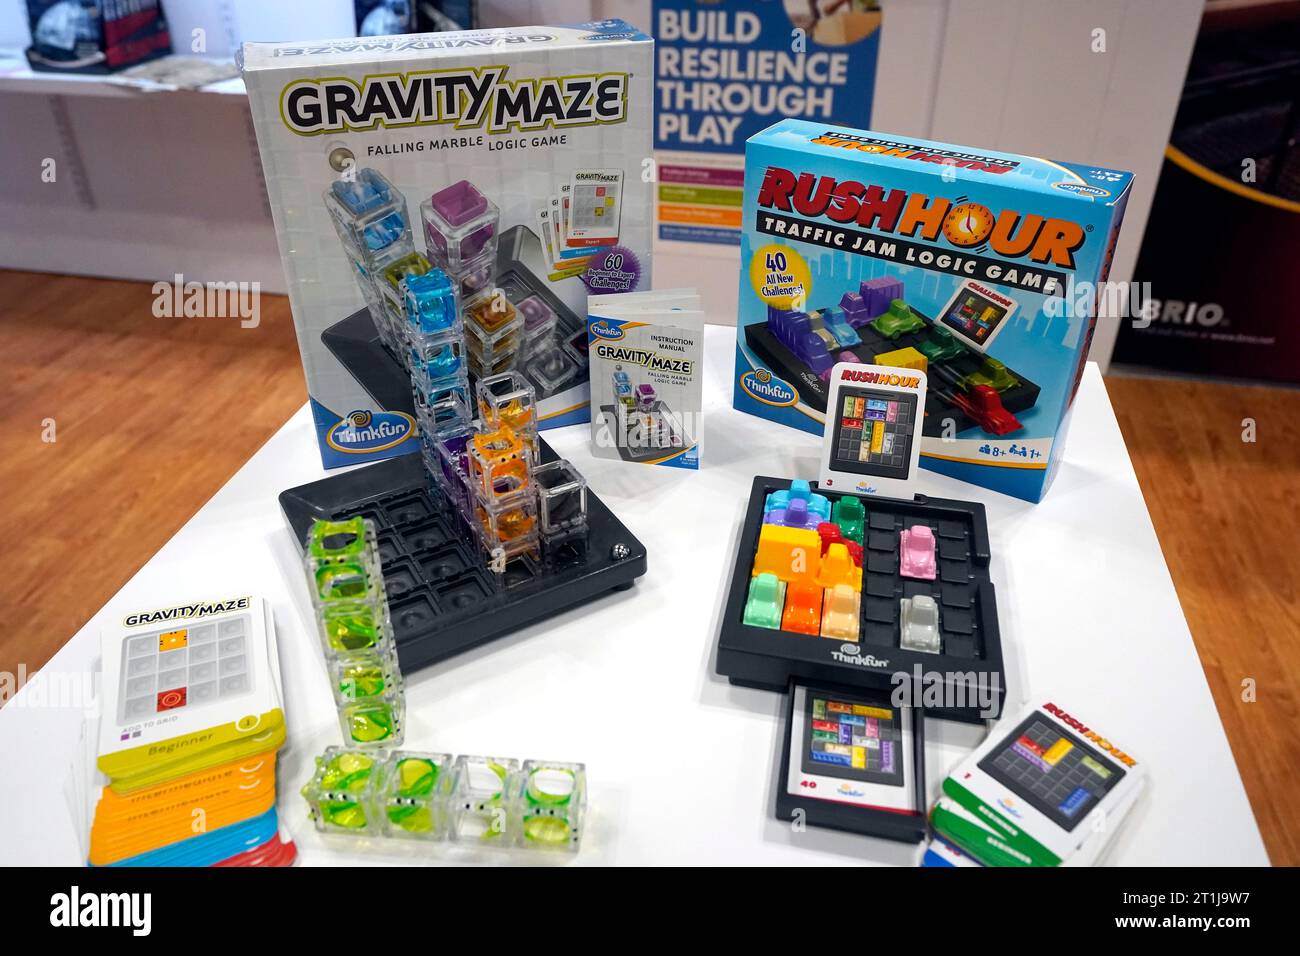 https://c8.alamy.com/comp/2T1J9W7/a-gravity-maze-game-left-and-rush-hour-game-from-thinkfun-are-displayed-at-the-2023-toy-fair-in-new-yorks-javits-center-monday-oct-2-2023-while-still-in-its-early-phase-a-growing-number-of-toy-marketers-are-embracing-an-anacronym-called-mesh-mental-emotional-and-social-health-which-was-first-used-in-child-development-circles-and-by-the-american-camp-association-ap-photorichard-drew-2T1J9W7.jpg